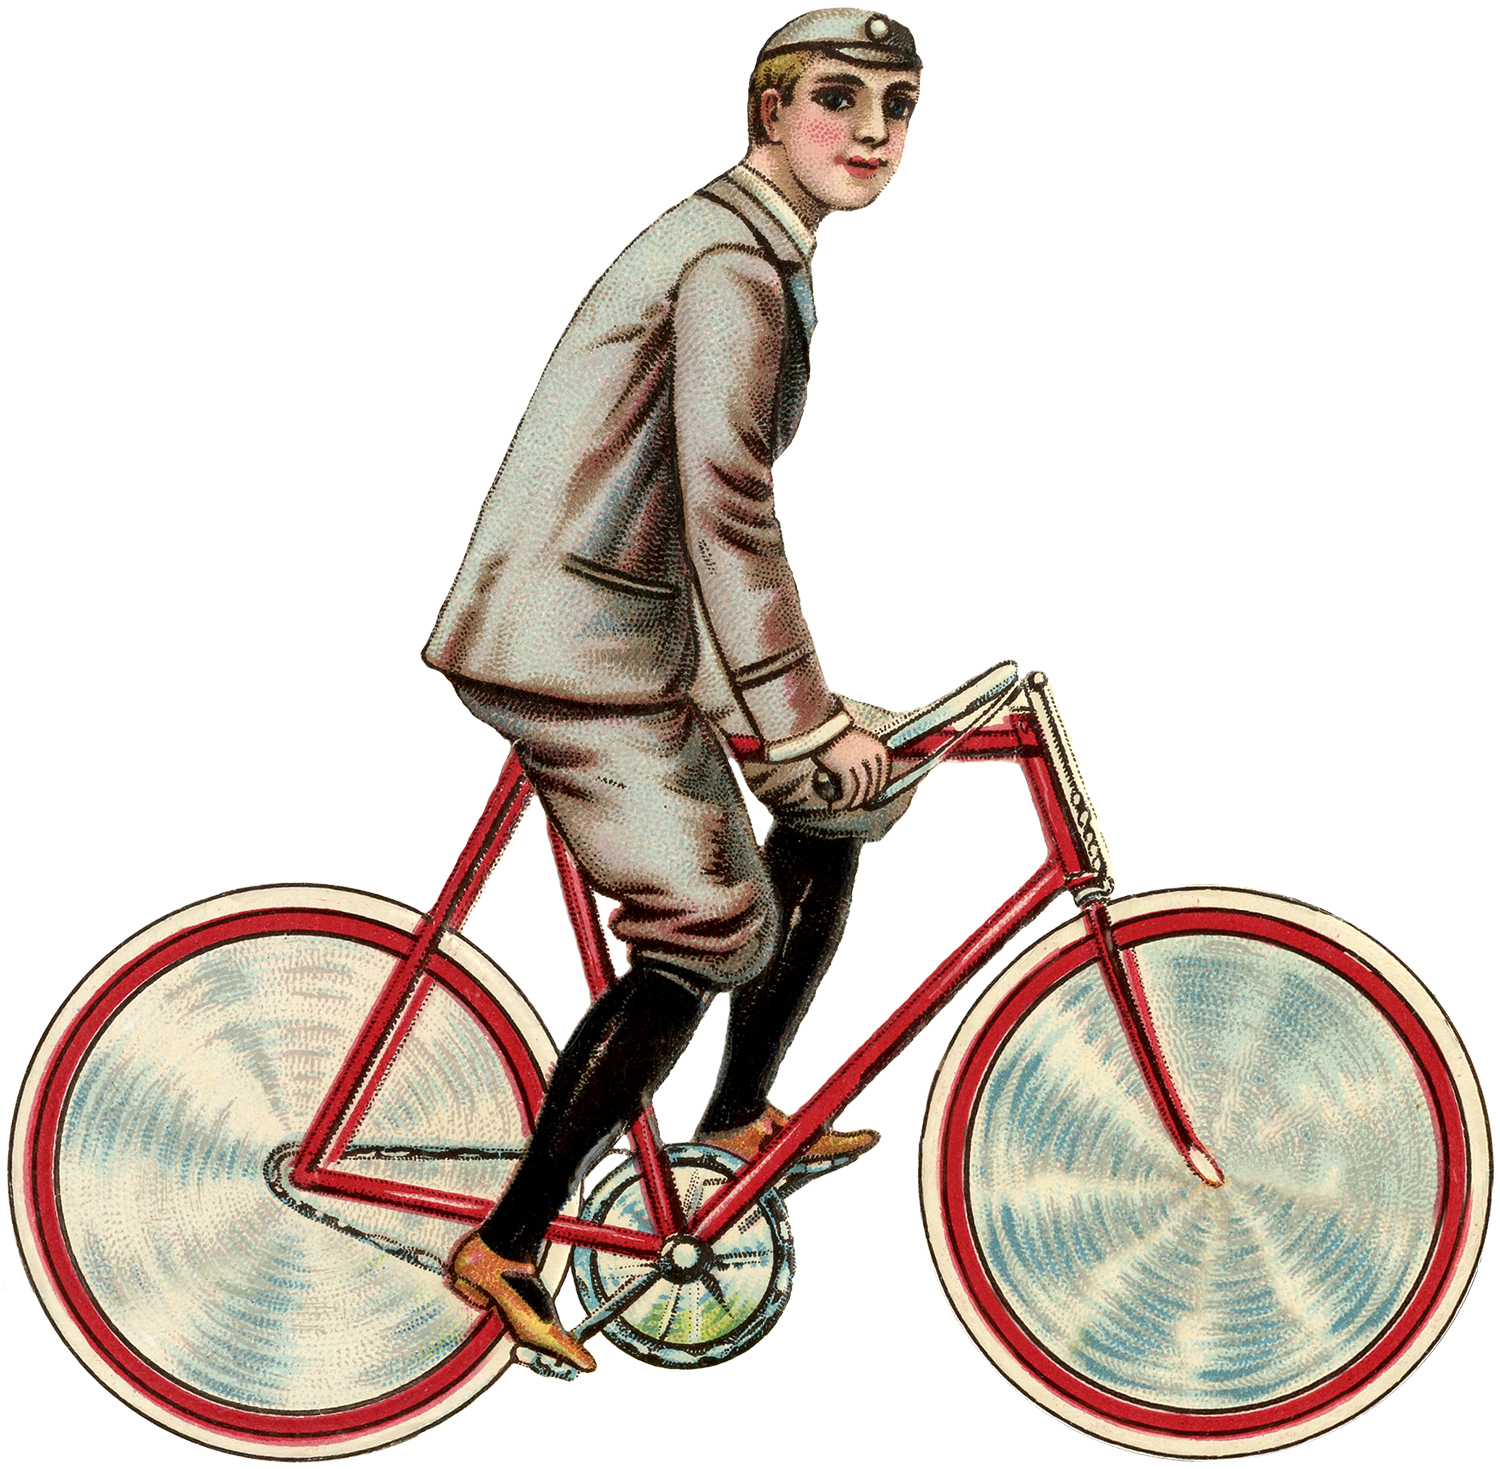 Vintage Bicycle Boy Image - The Graphics Fairy